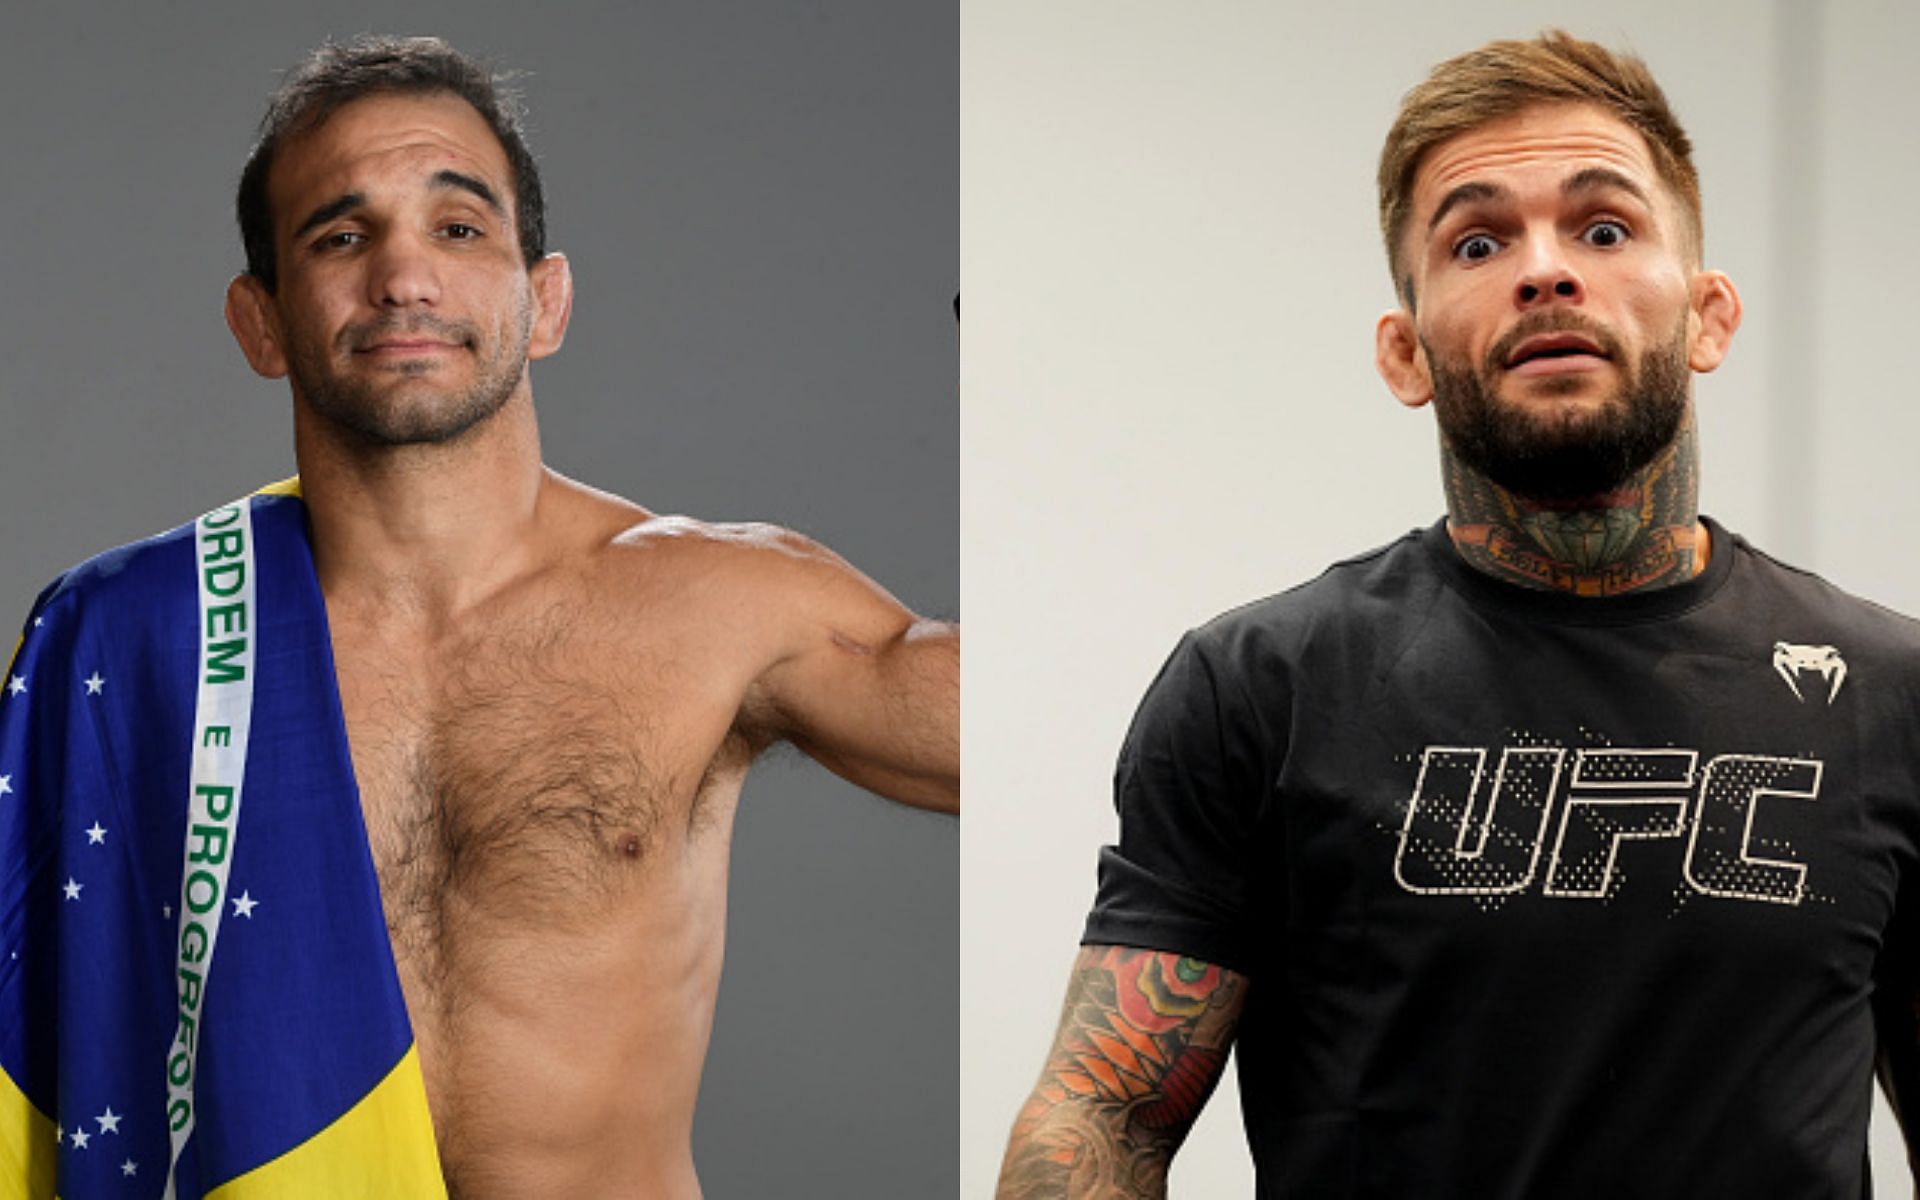 Rani Yahya (left) and Cody Garbrandt (right) (Images via Getty)